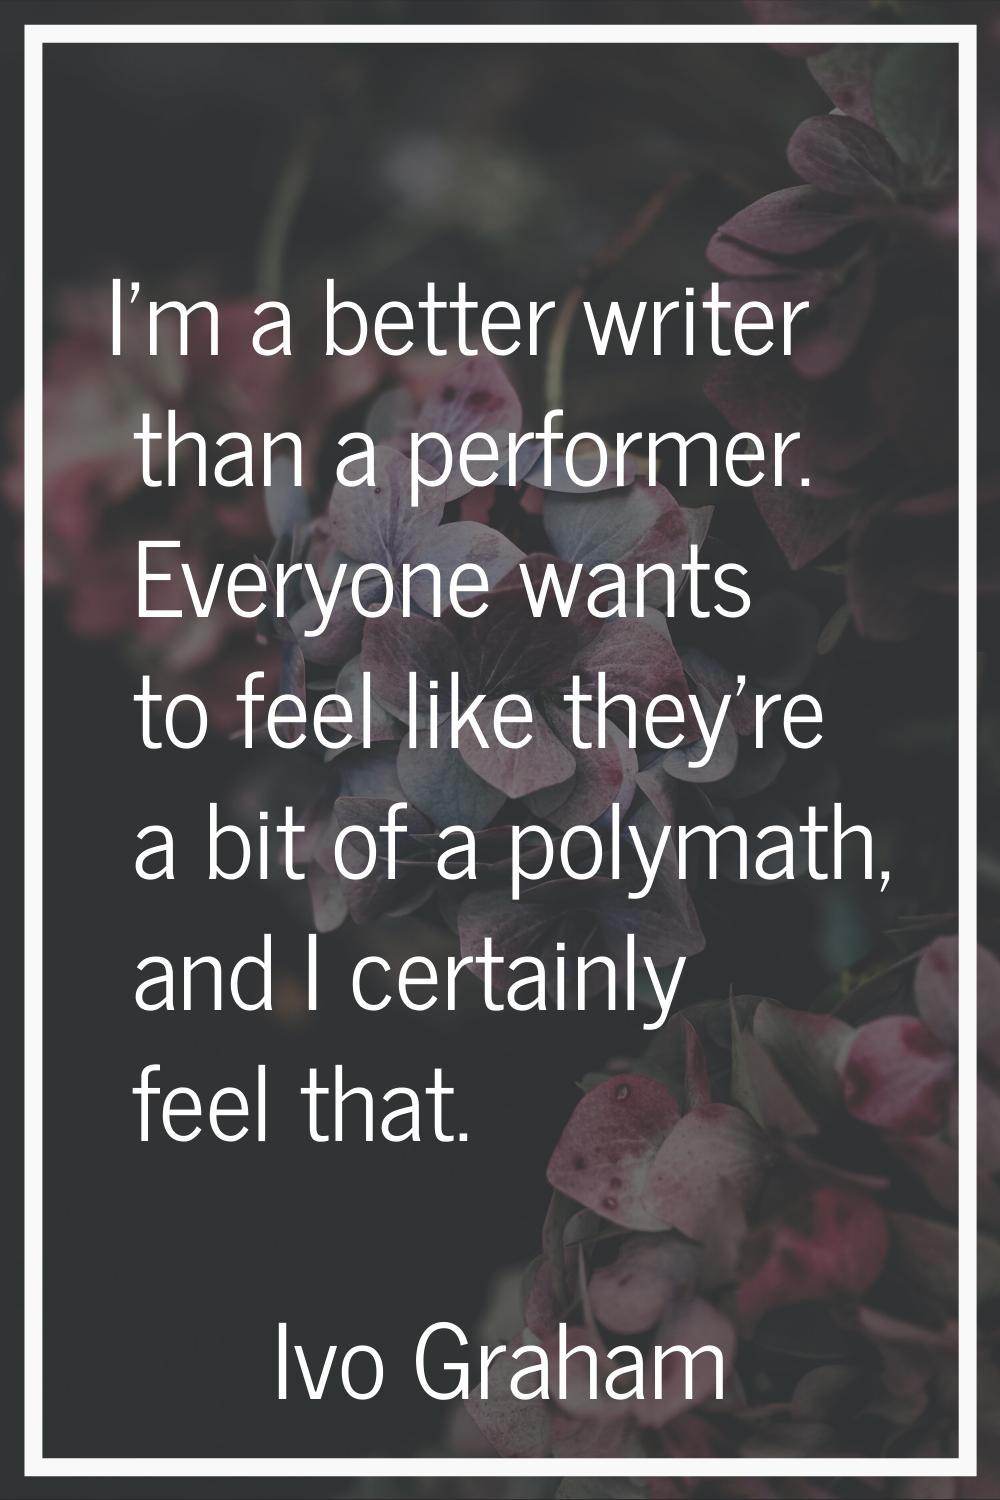 I'm a better writer than a performer. Everyone wants to feel like they're a bit of a polymath, and 